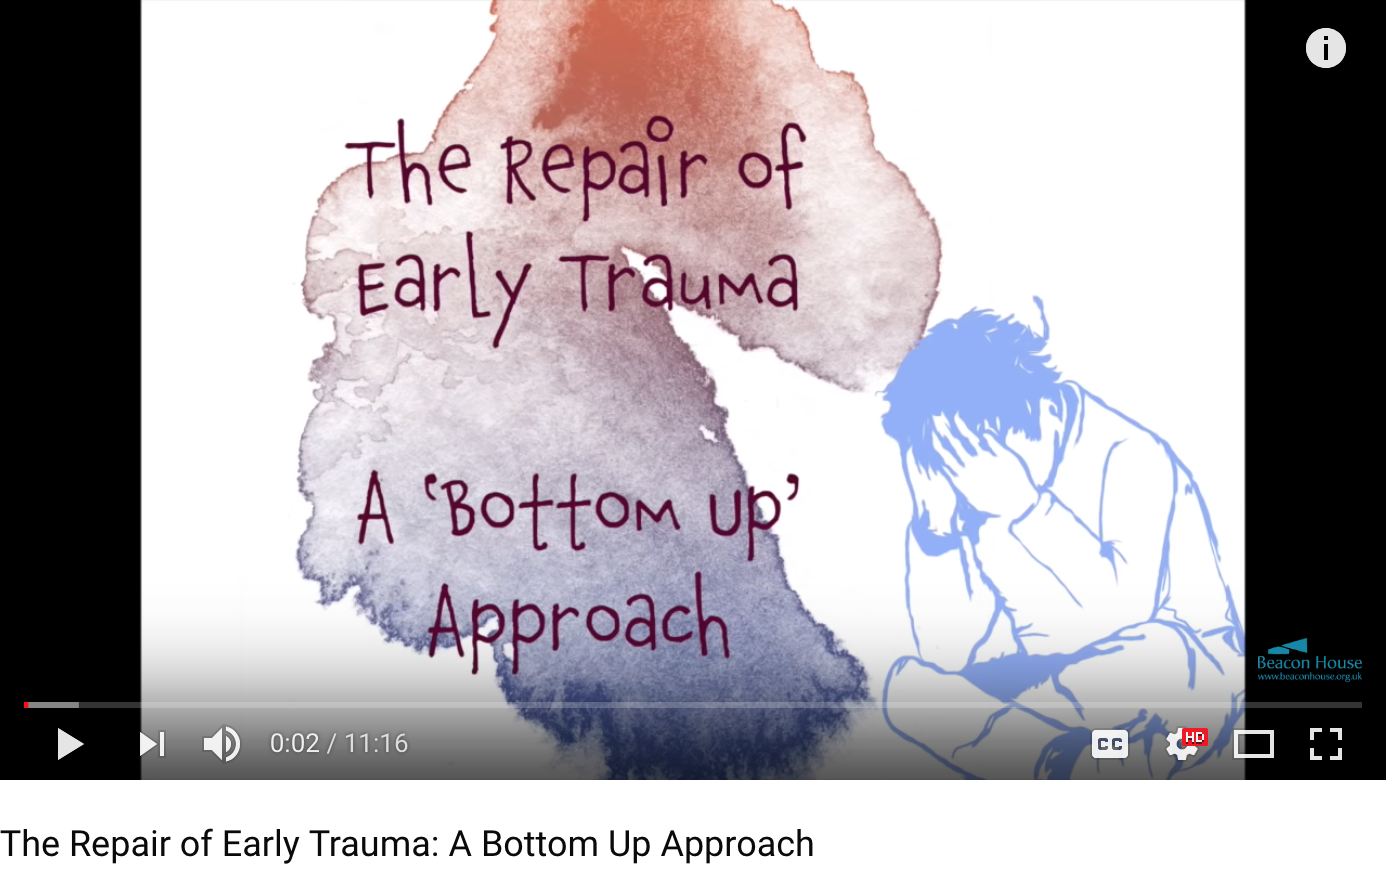 The Repair of Early Trauma A Bottom Up Approach